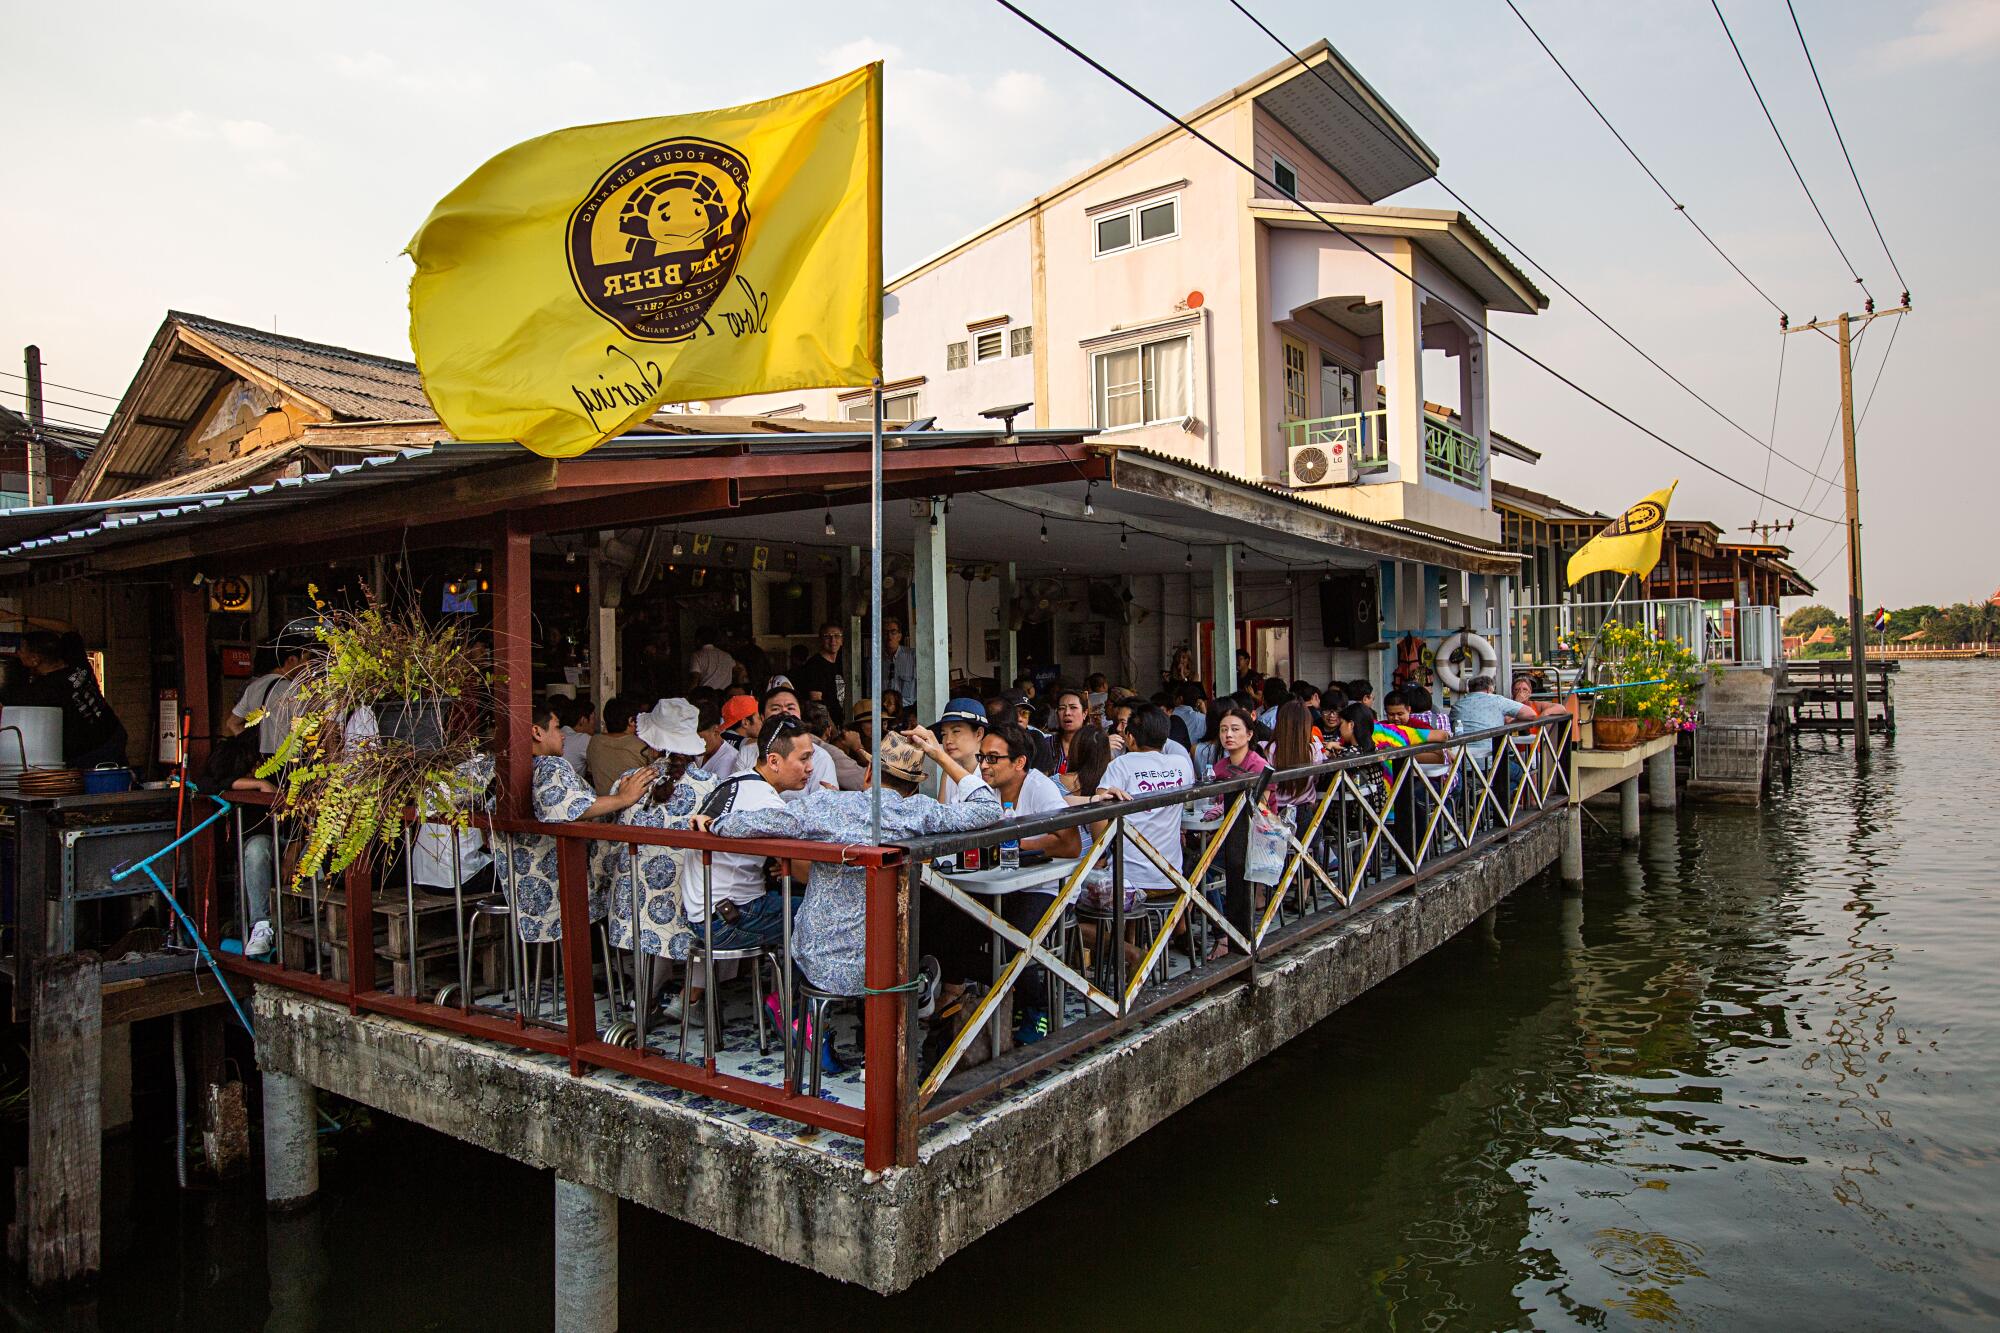 View of Chit Beer, a craft brewery on Koh Kret island on the Chao Phraya River in Bangkok, Thailand.